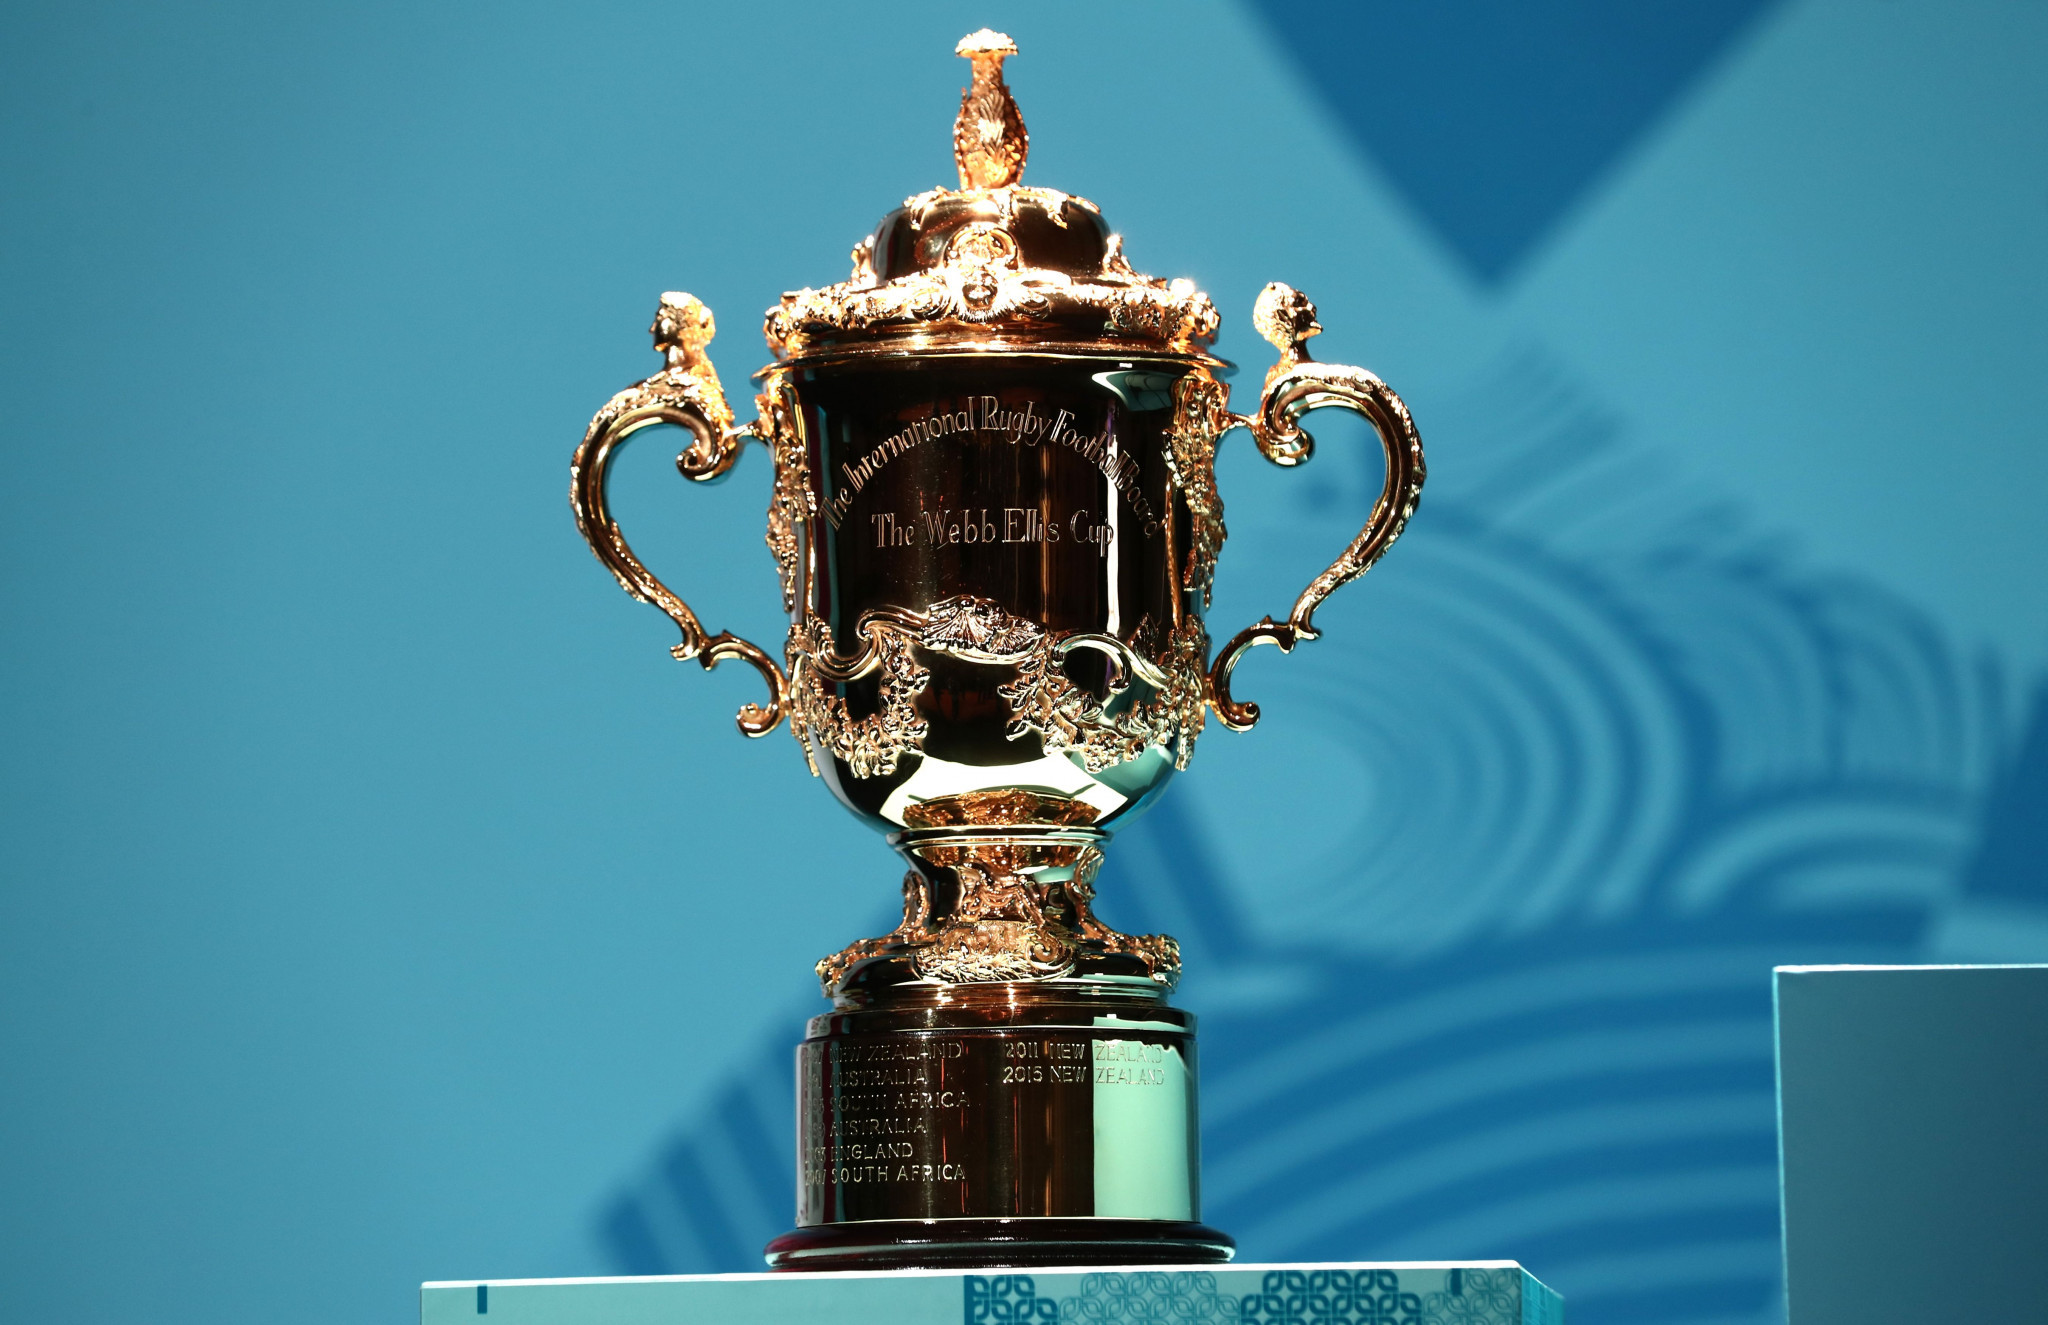 World Rugby warn tickets for key matches at 2019 World Cup "extremely limited" with January sales set to begin